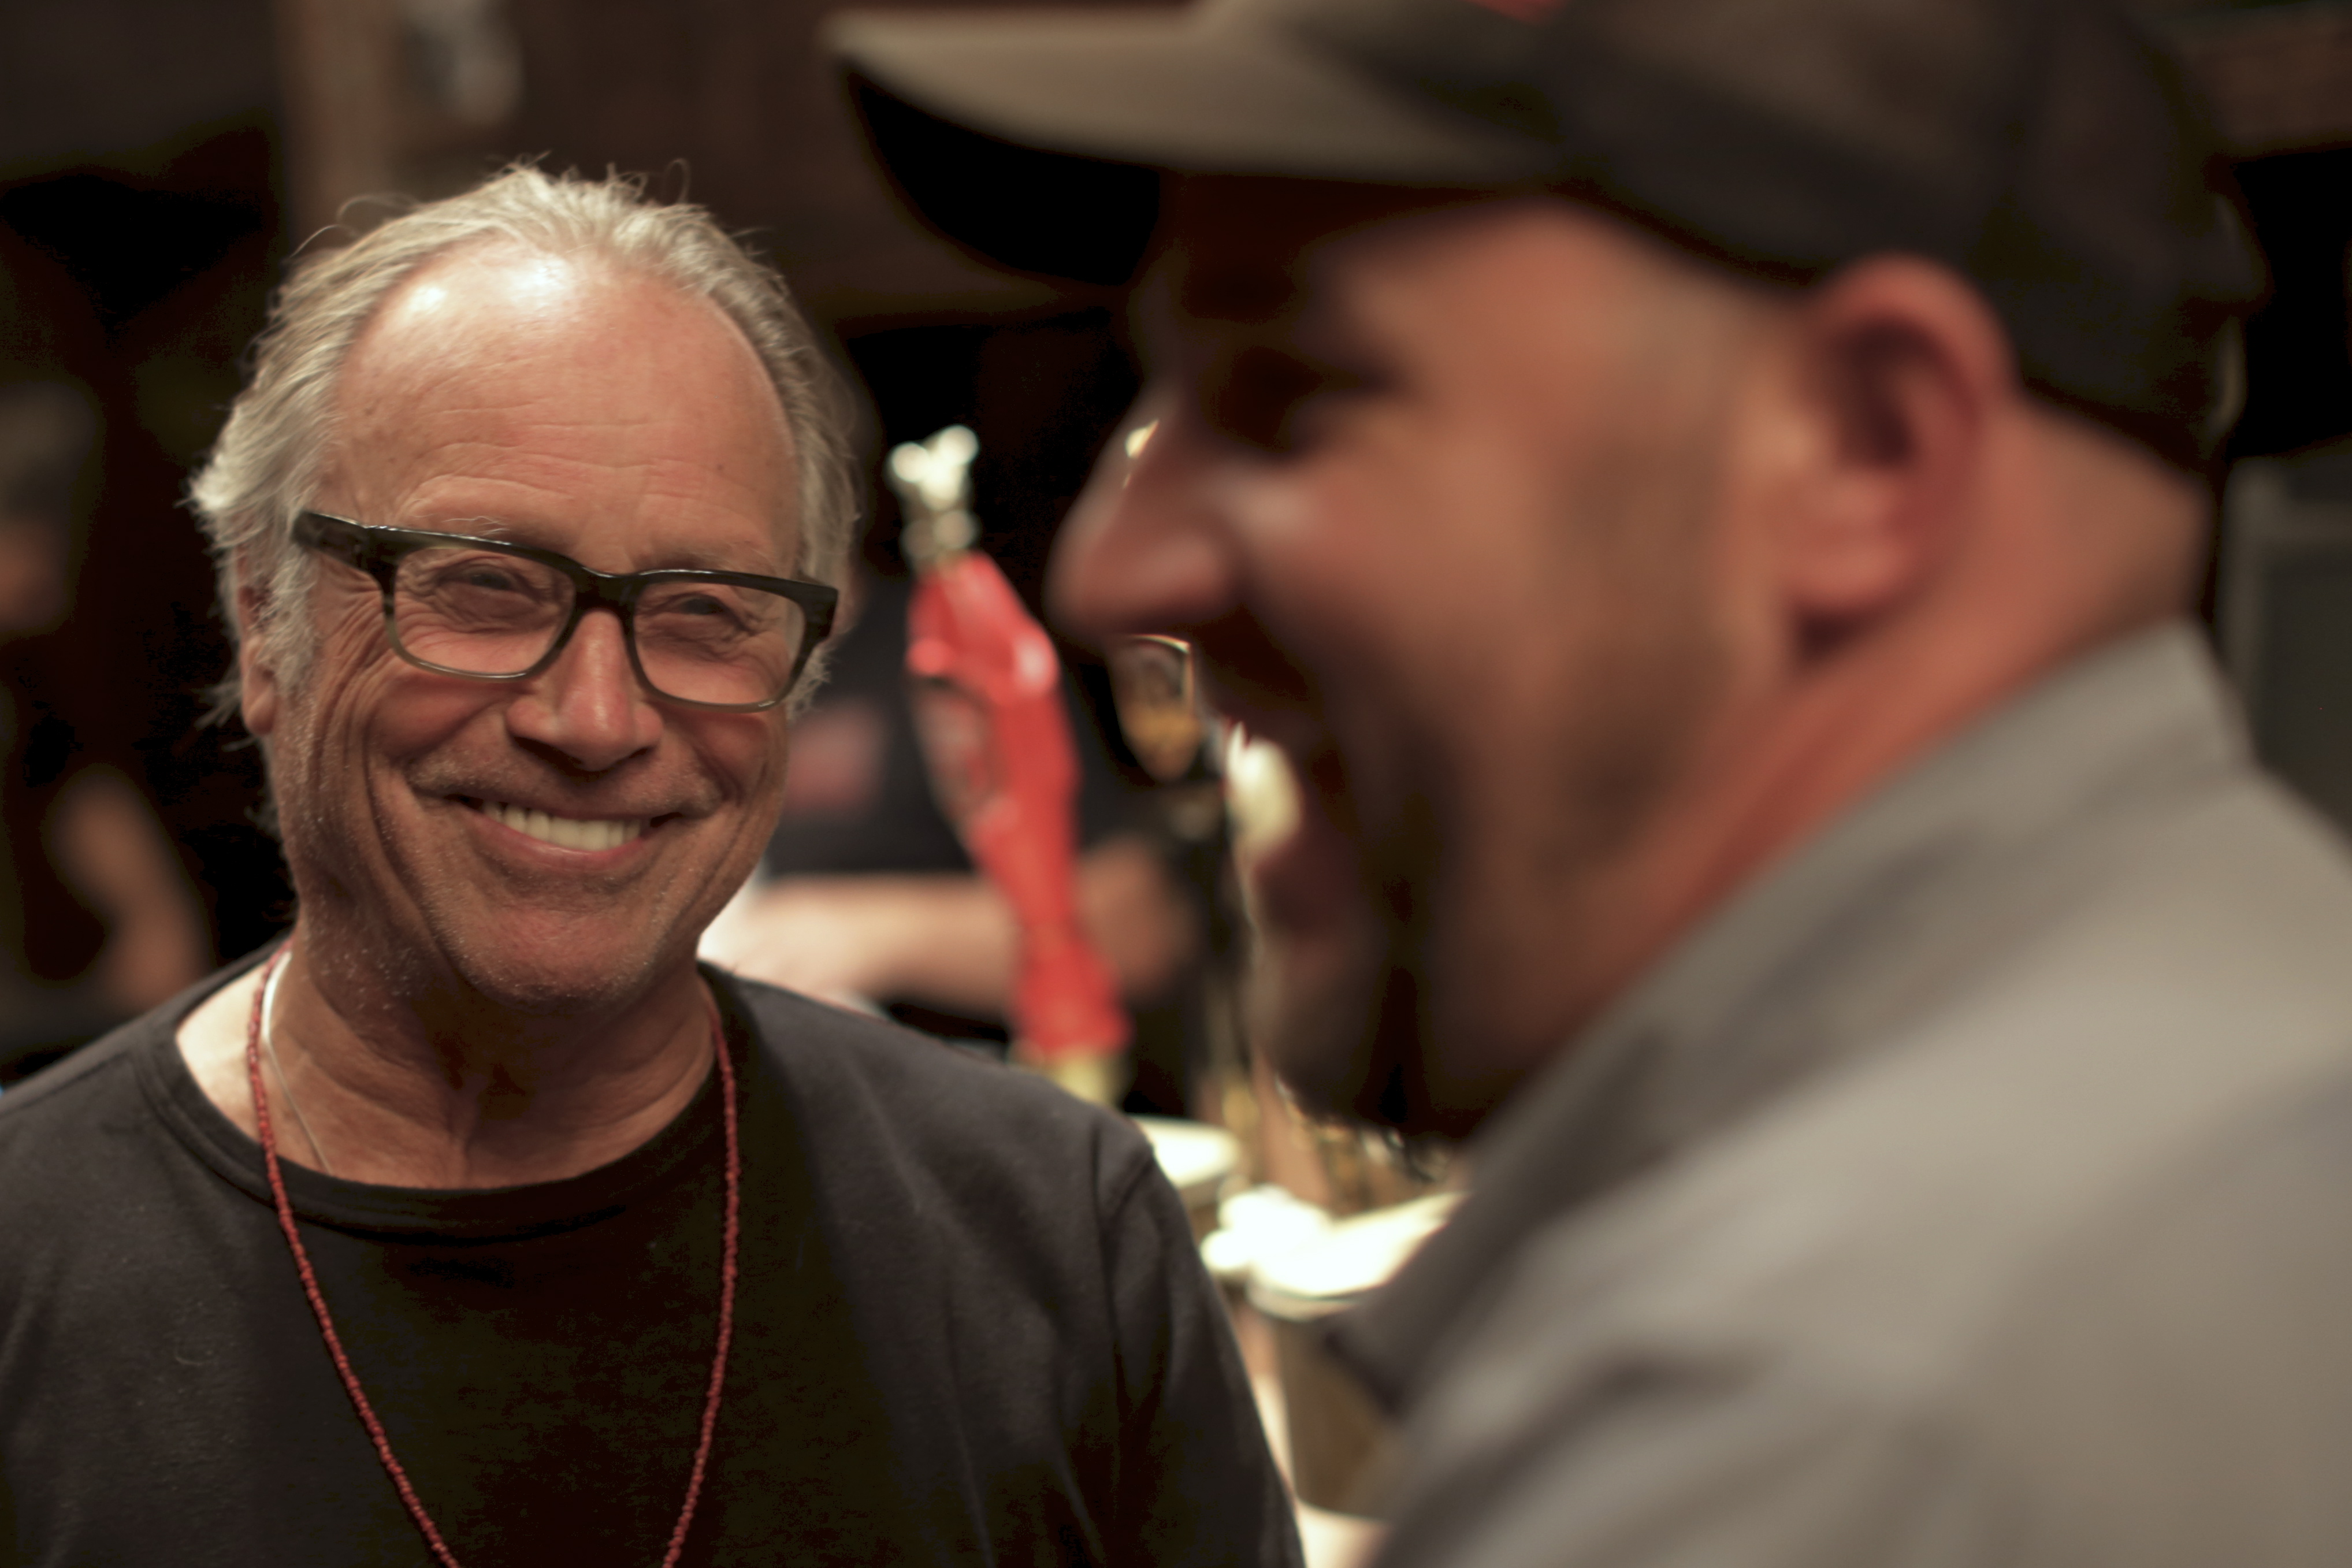 sharring a laugh on set with director Kevin Goetz